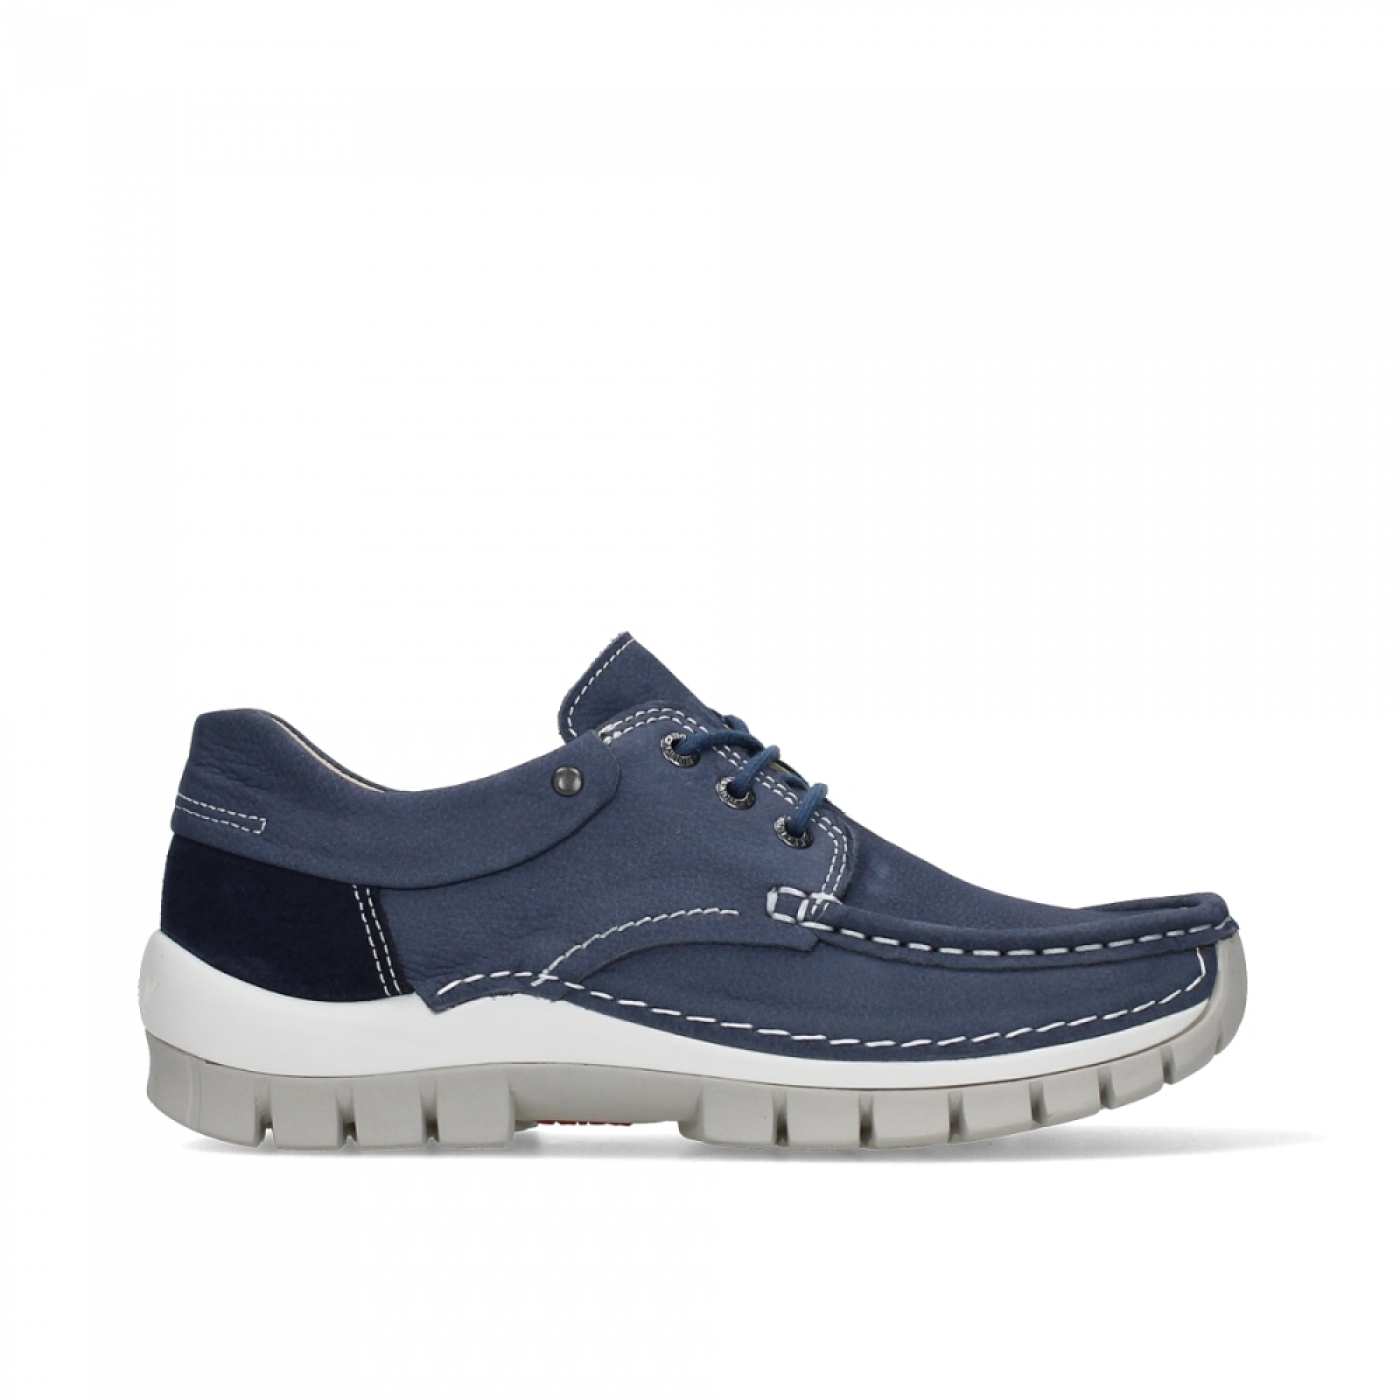 Wolky Shoes 04701 Fly Summer denim nubuck order now! Biggest Wolky ...